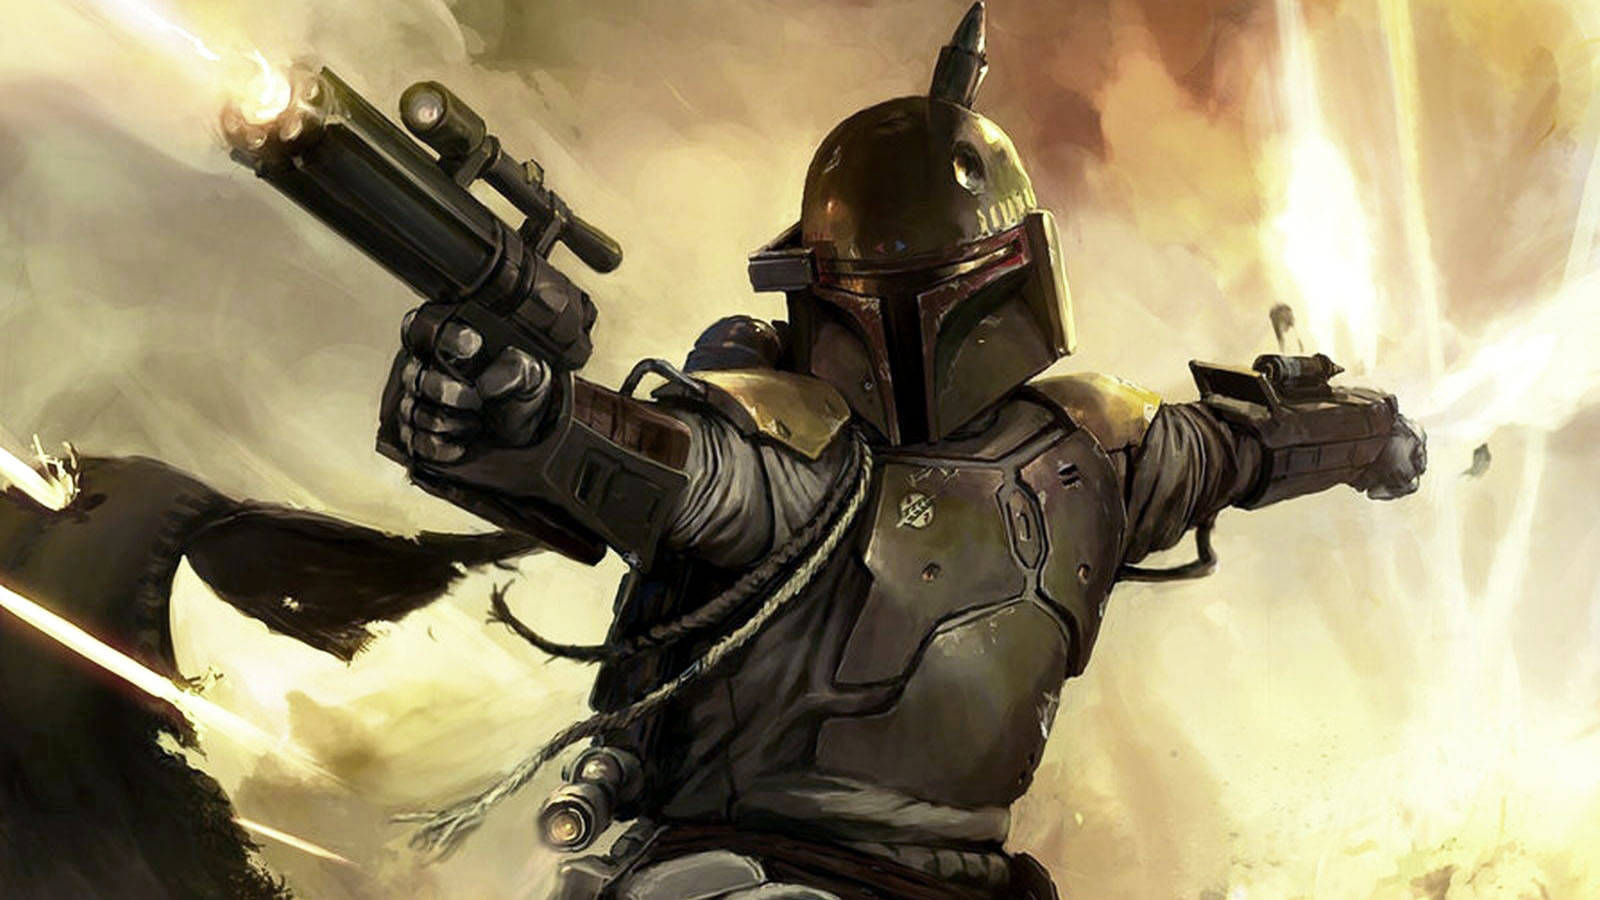 "Boba Fett, the notorious bounty hunter, with his signature blasters." Wallpaper